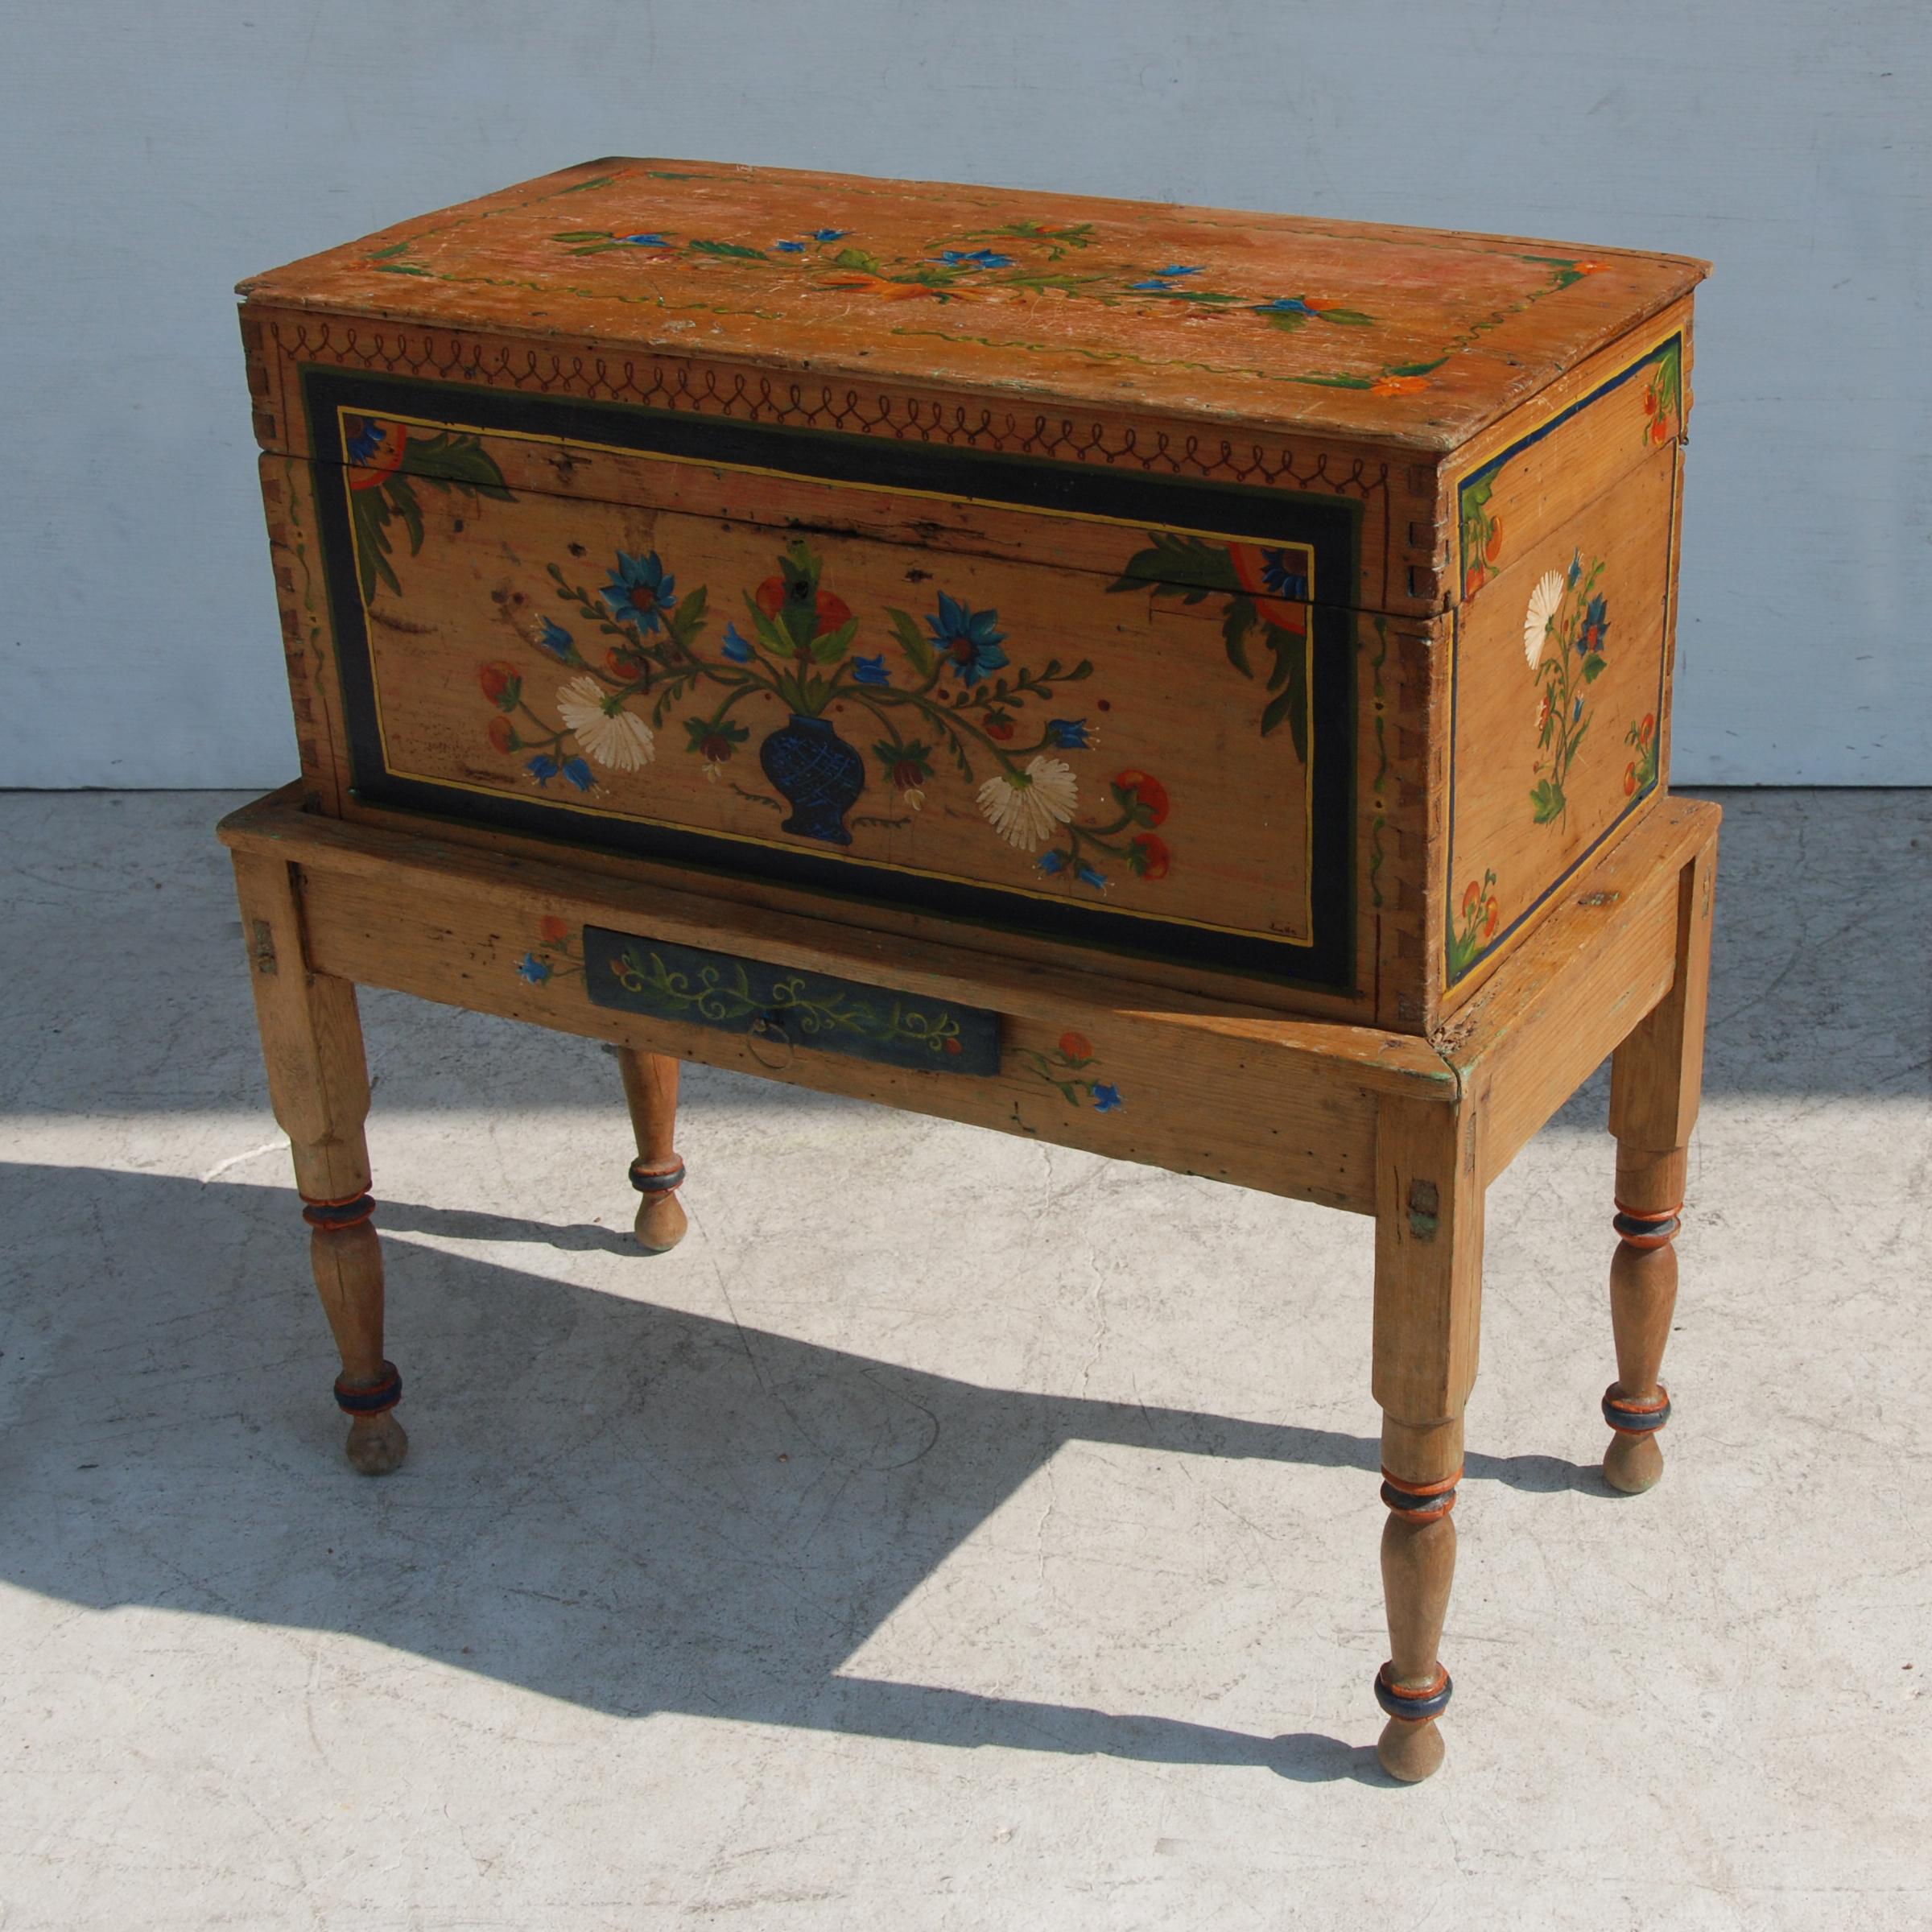 Hand-Painted Antique, Hand Painted Mexican Wedding or Hope Chest on Stand